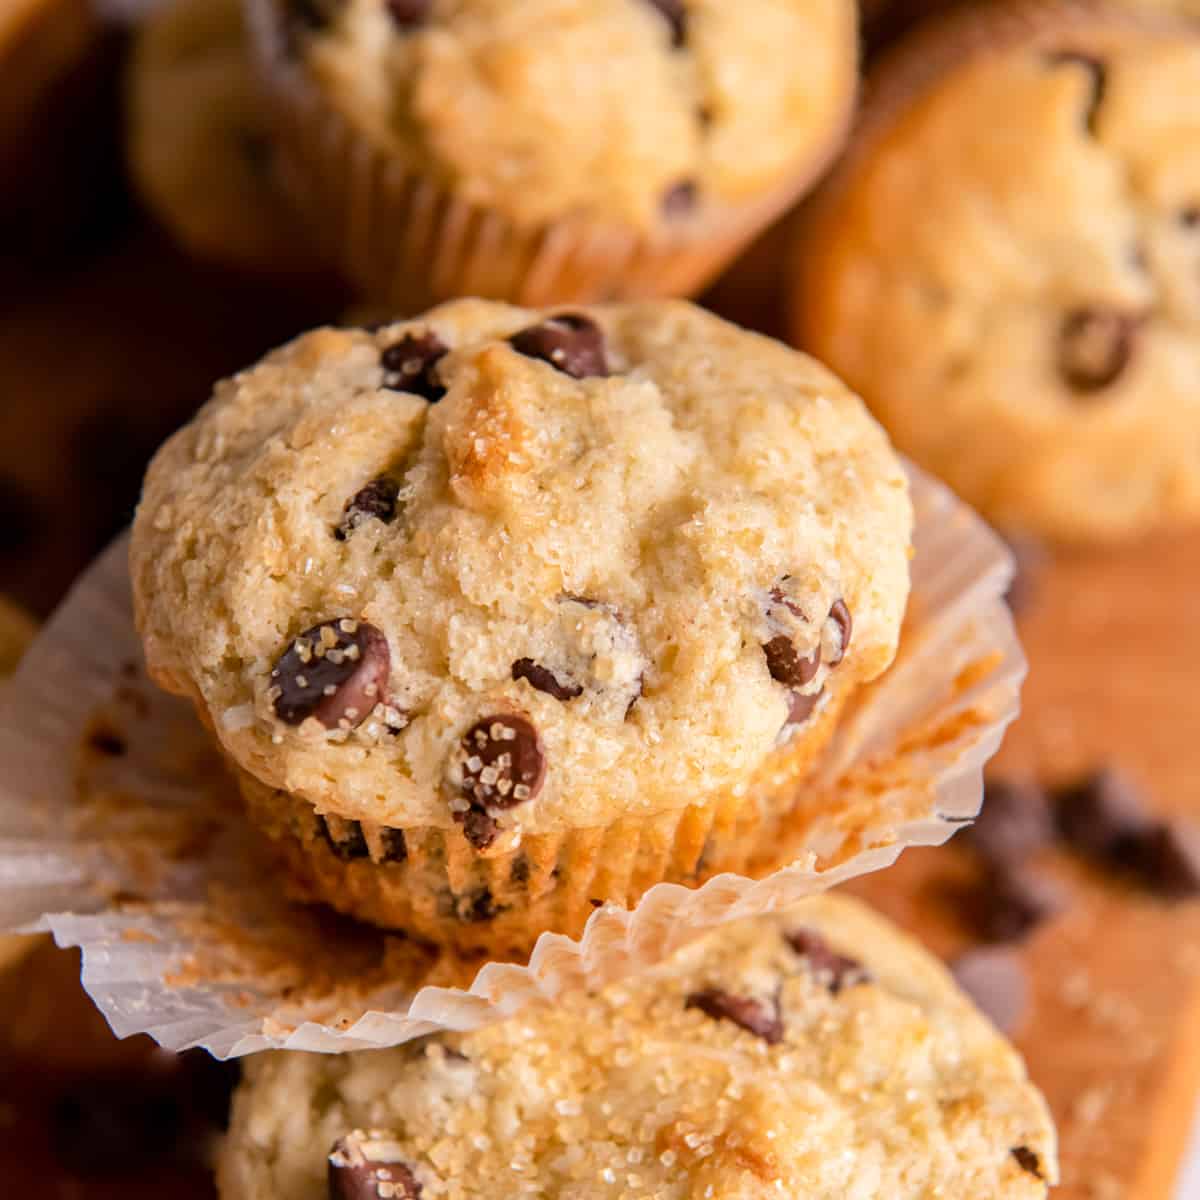 https://www.thecookierookie.com/wp-content/uploads/2022/03/Featured-chocolate-chip-muffins-1.jpg